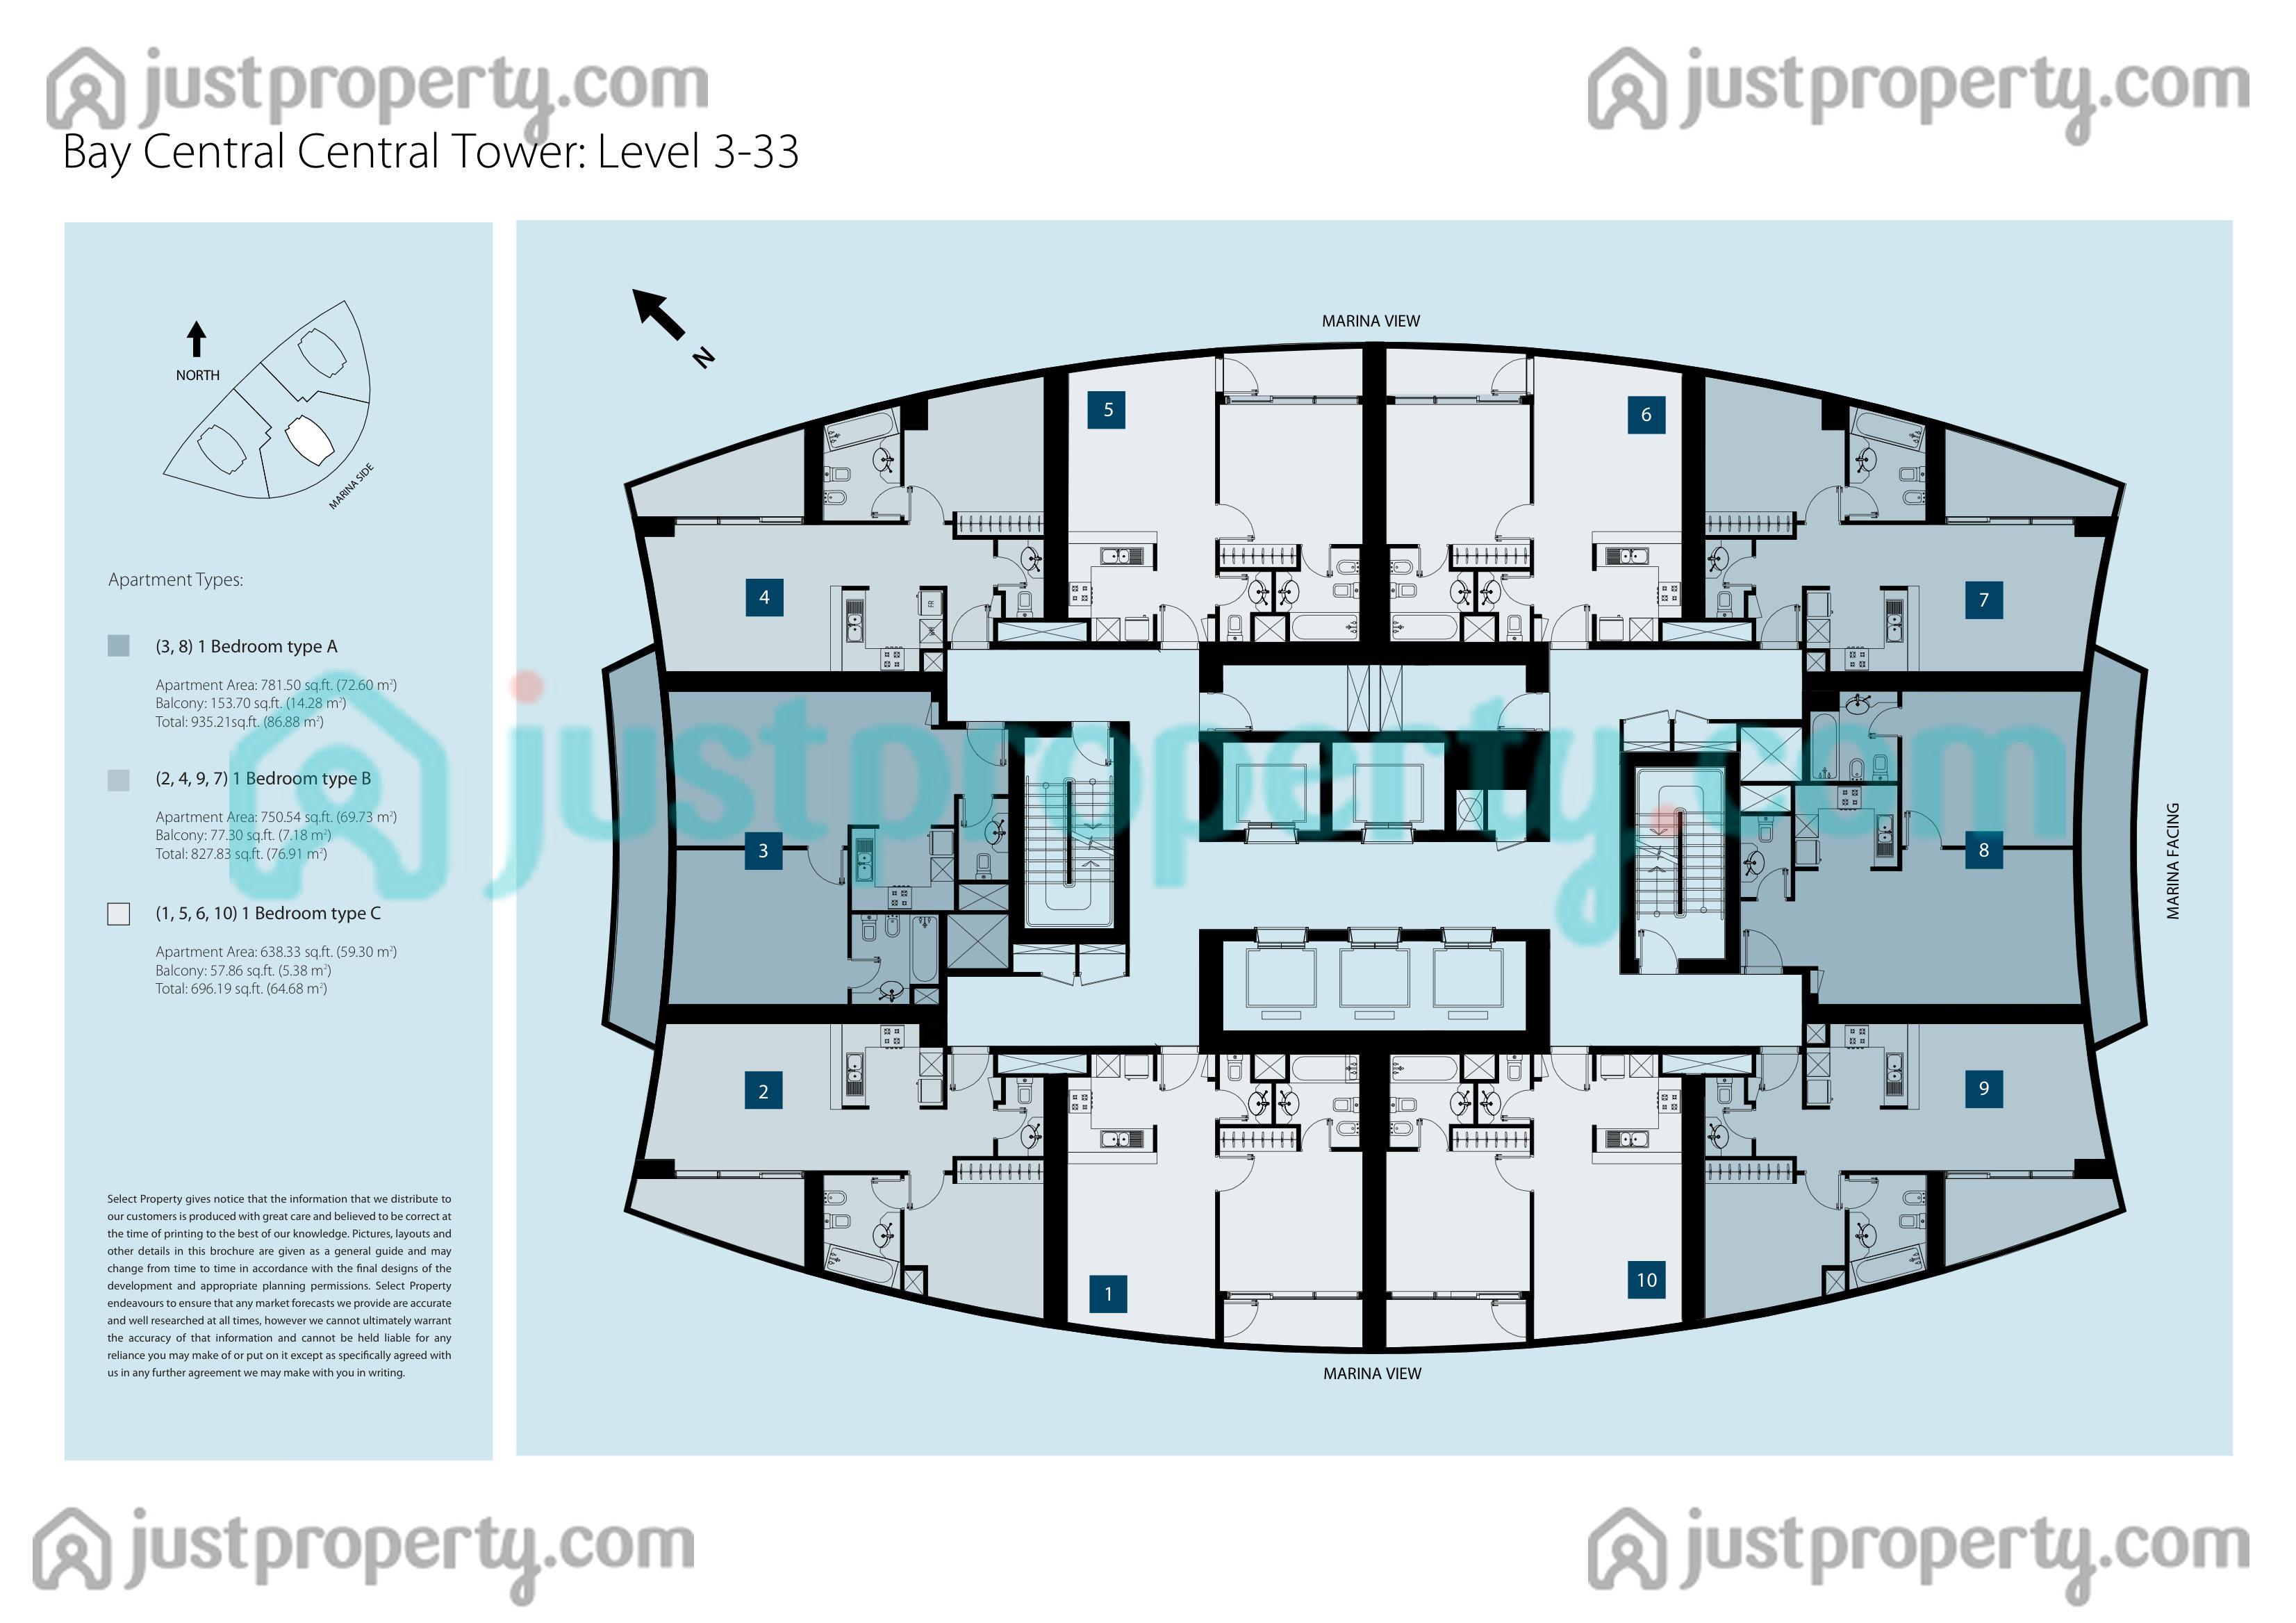 Bay Central Central Tower Floor Plans